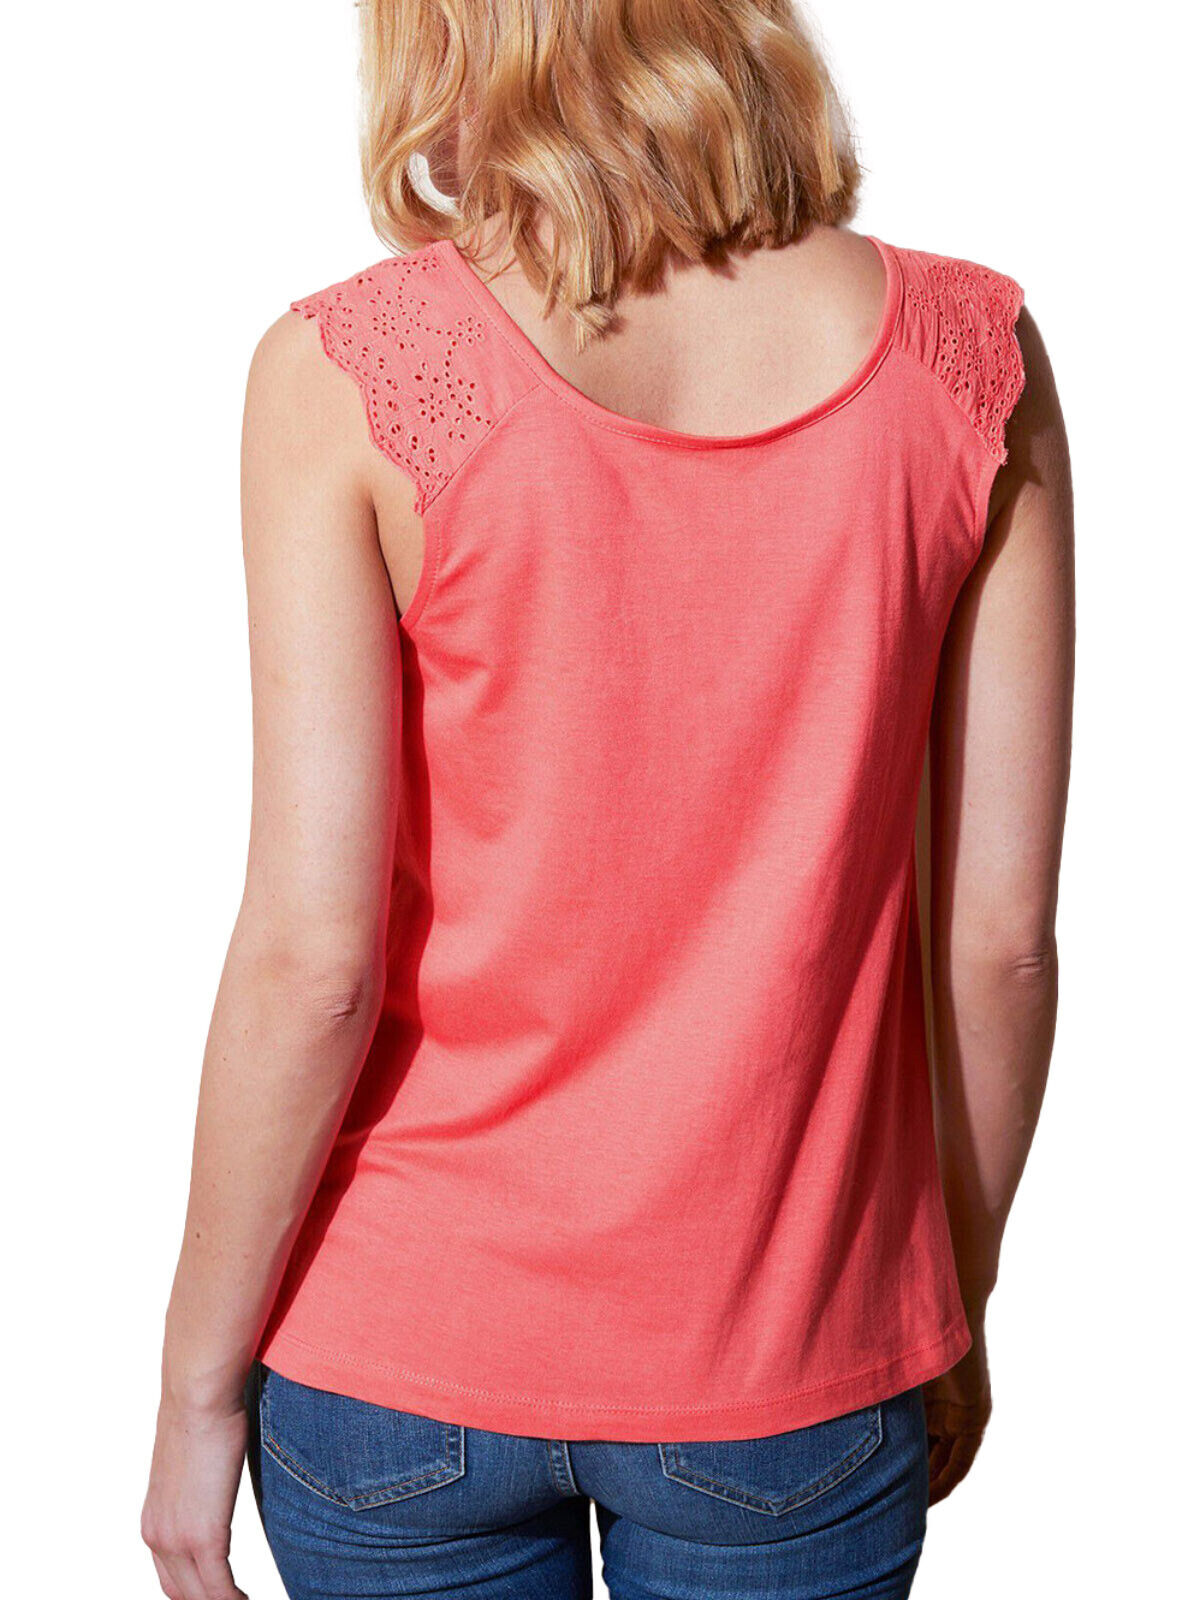 Blancheporte Coral Cotton Blend Sleeveless Broderie Trim Top in Sizes 14-26